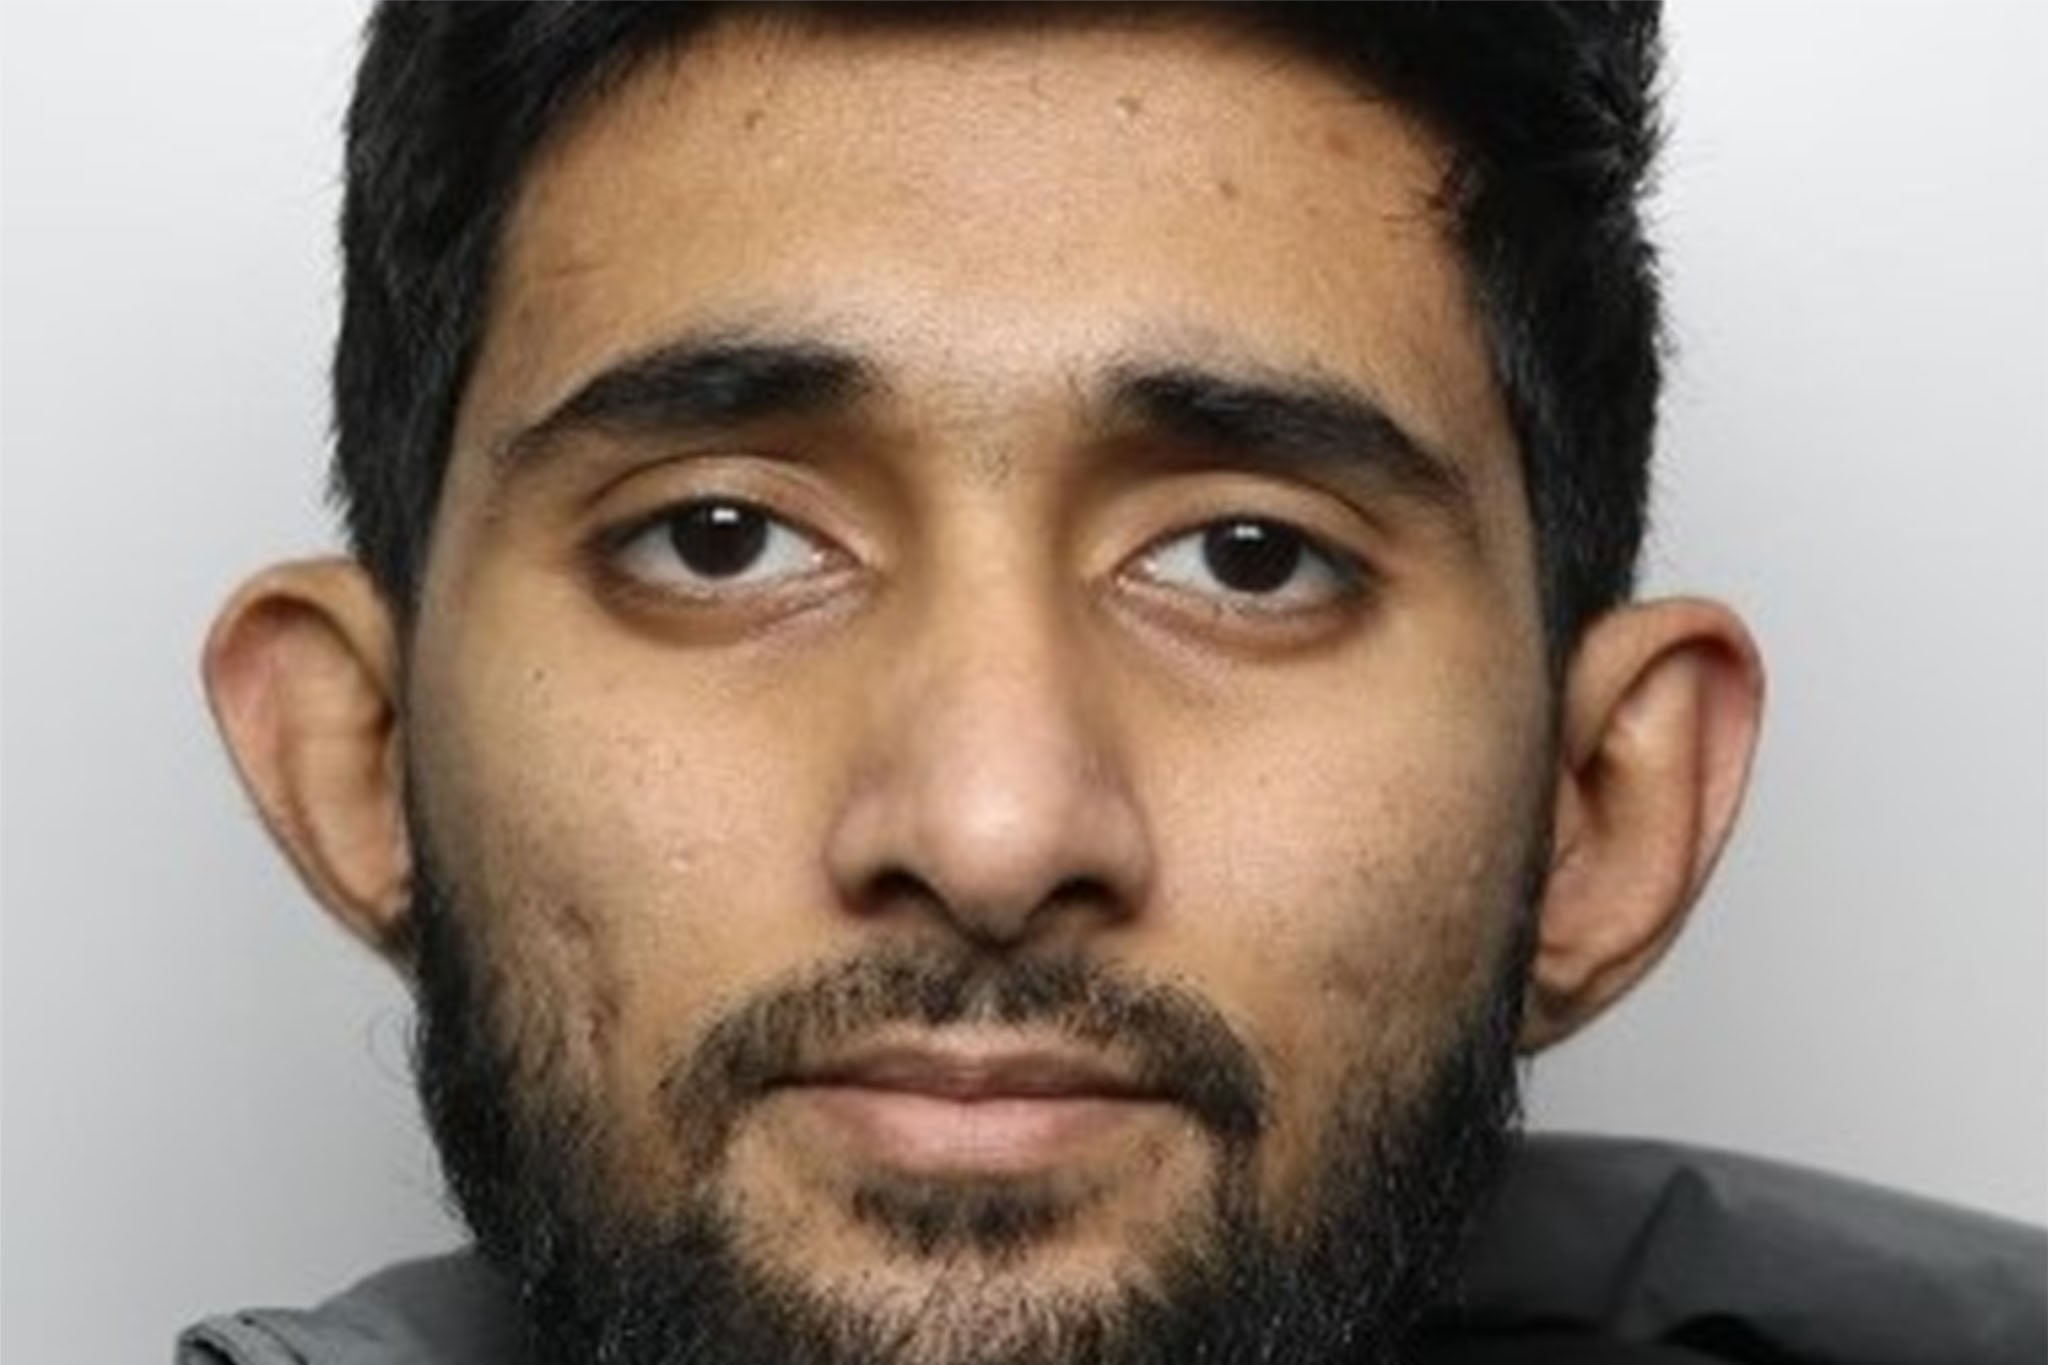 Officers are appealing for members of the public to report any sightings of Habibur Masum